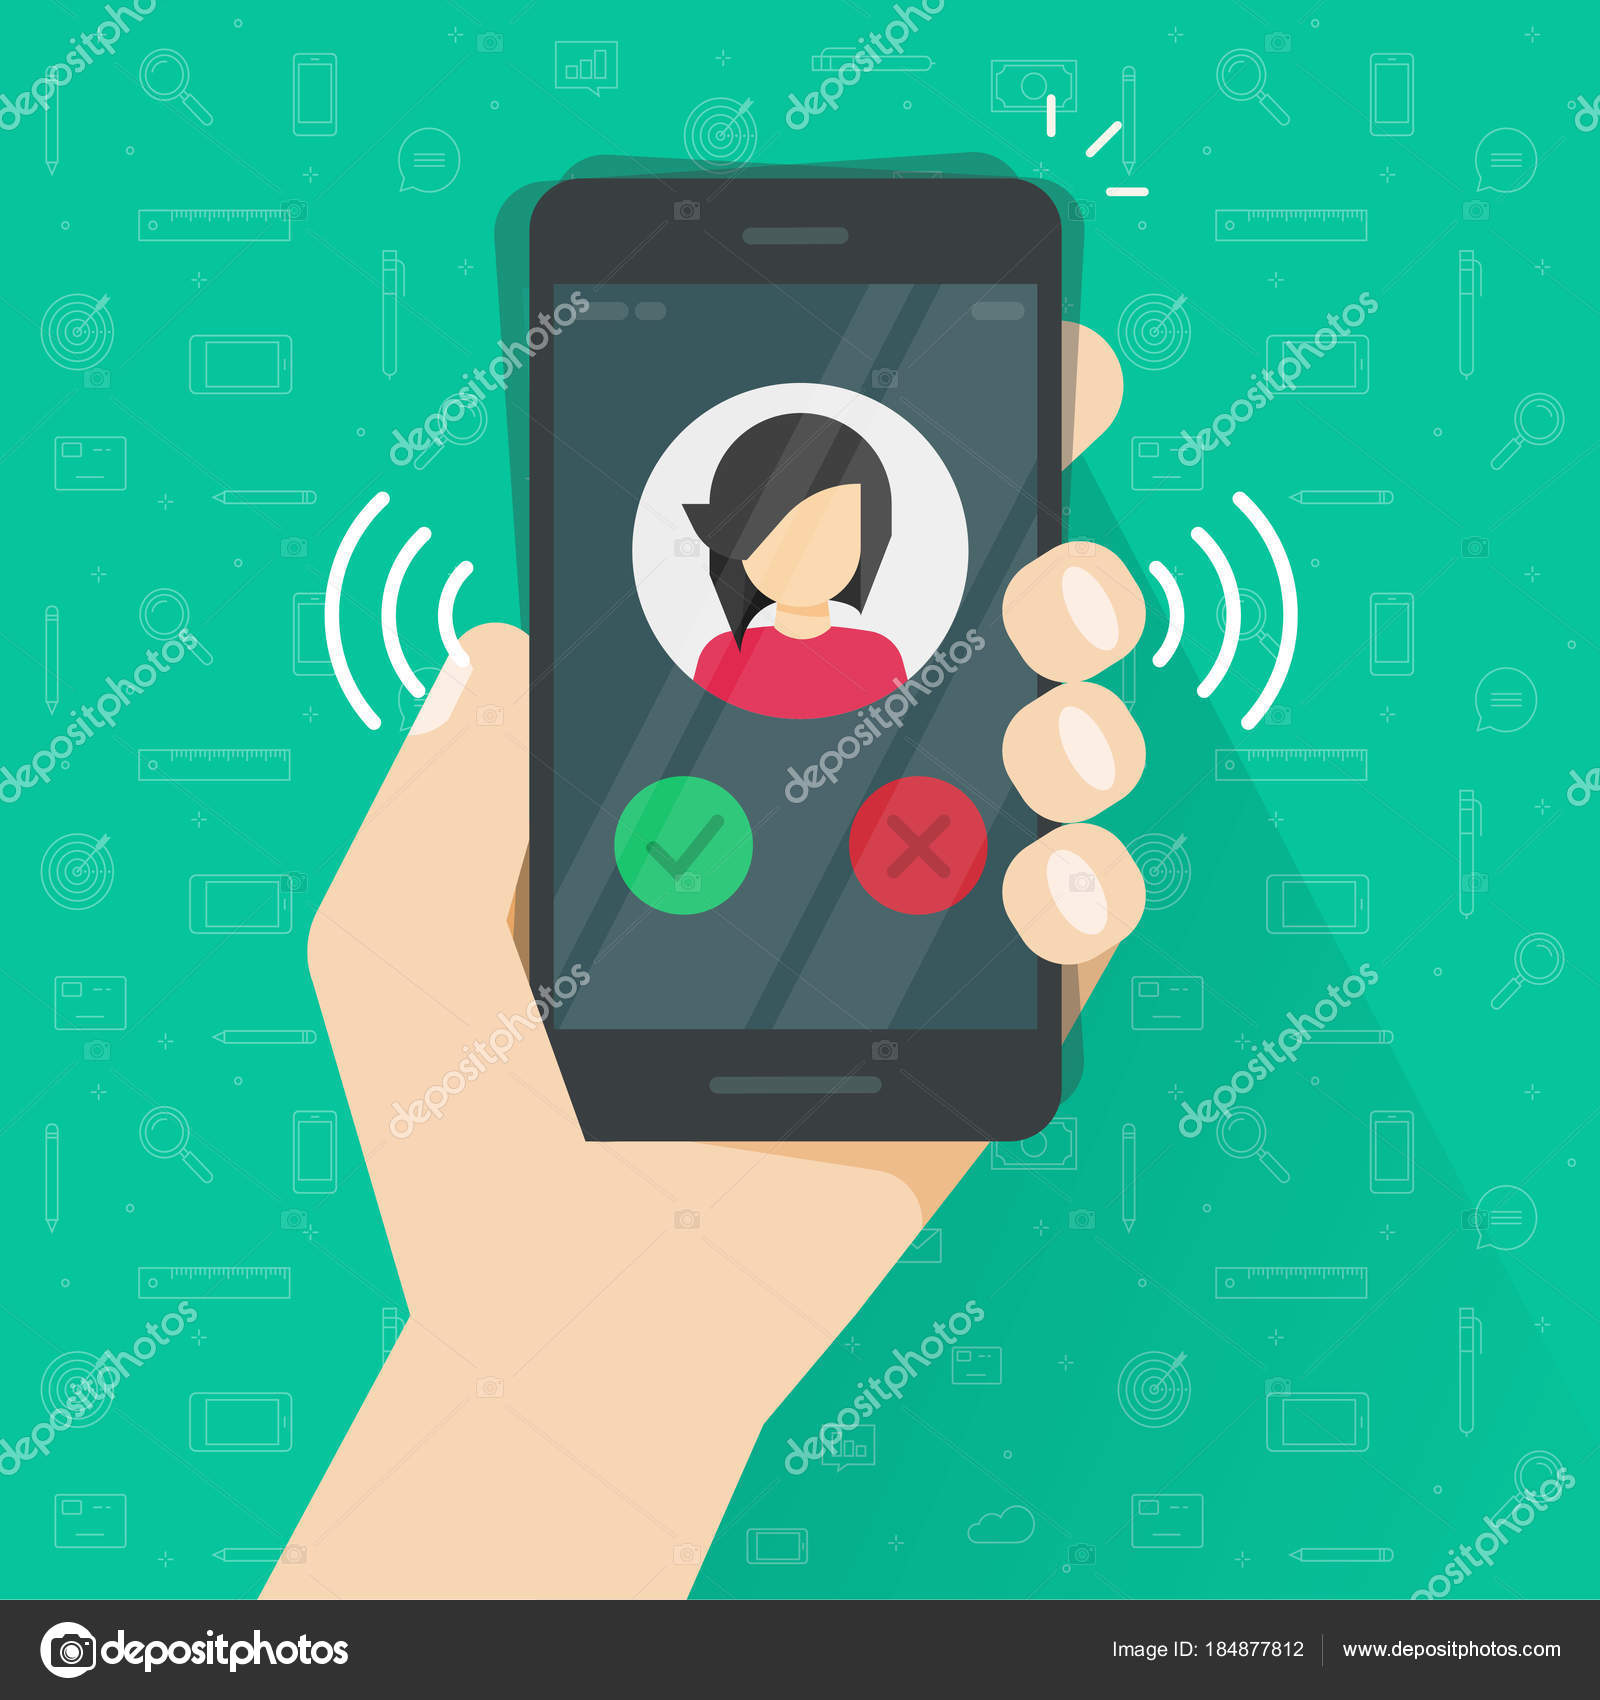 Smartphone or mobile phone ringing or calling vector illustration ...